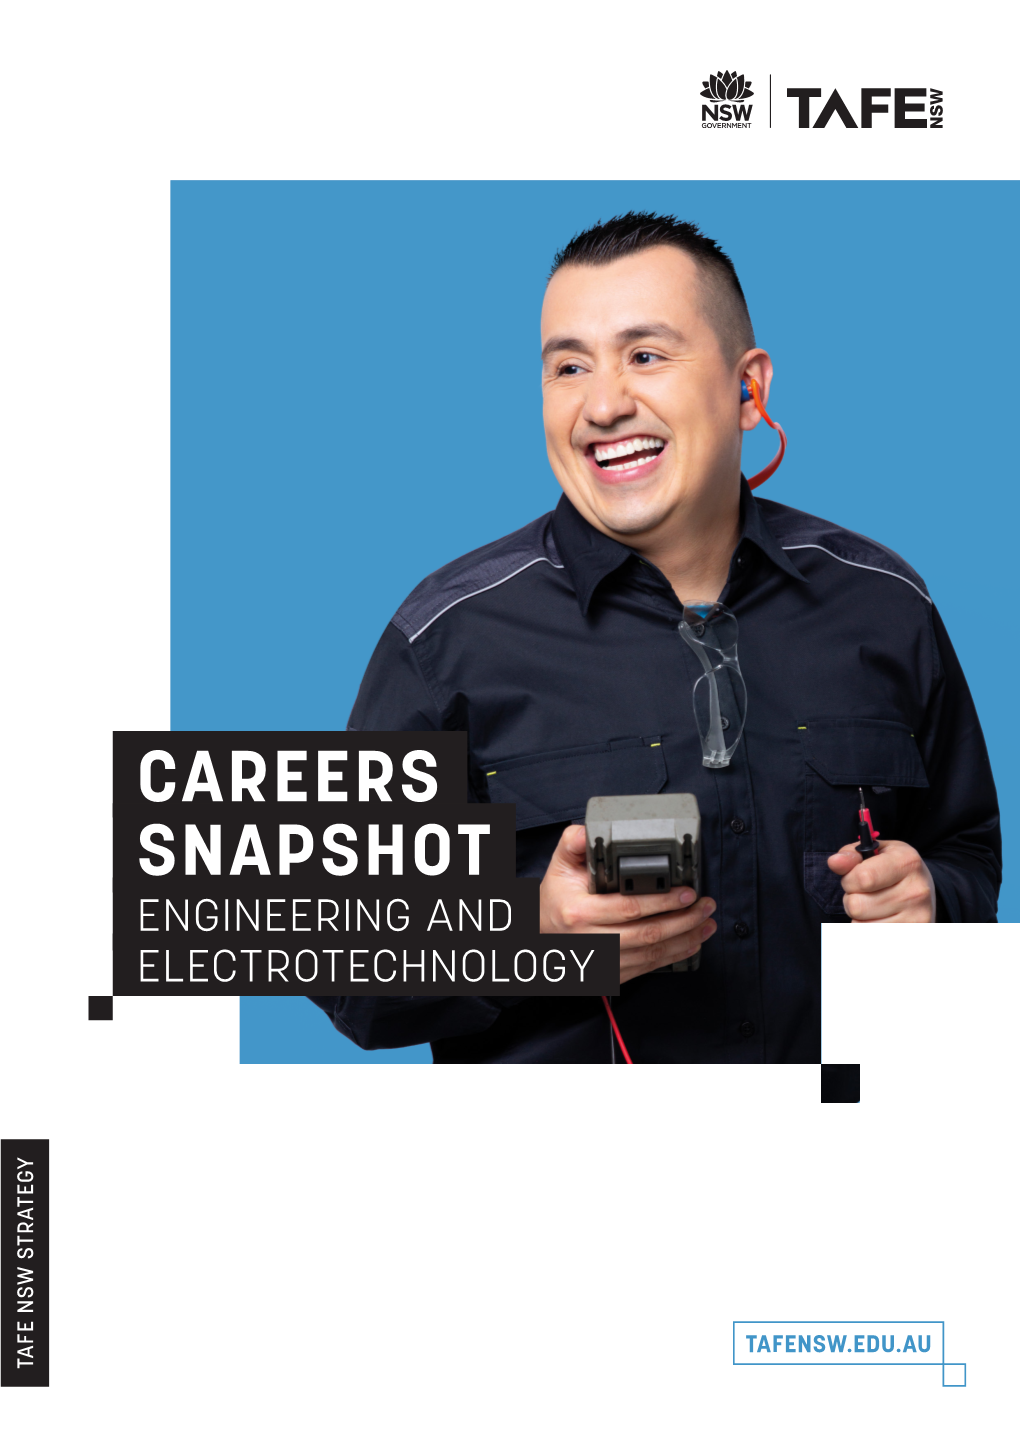 Careers Snapshot Engineering and Electrotechnology